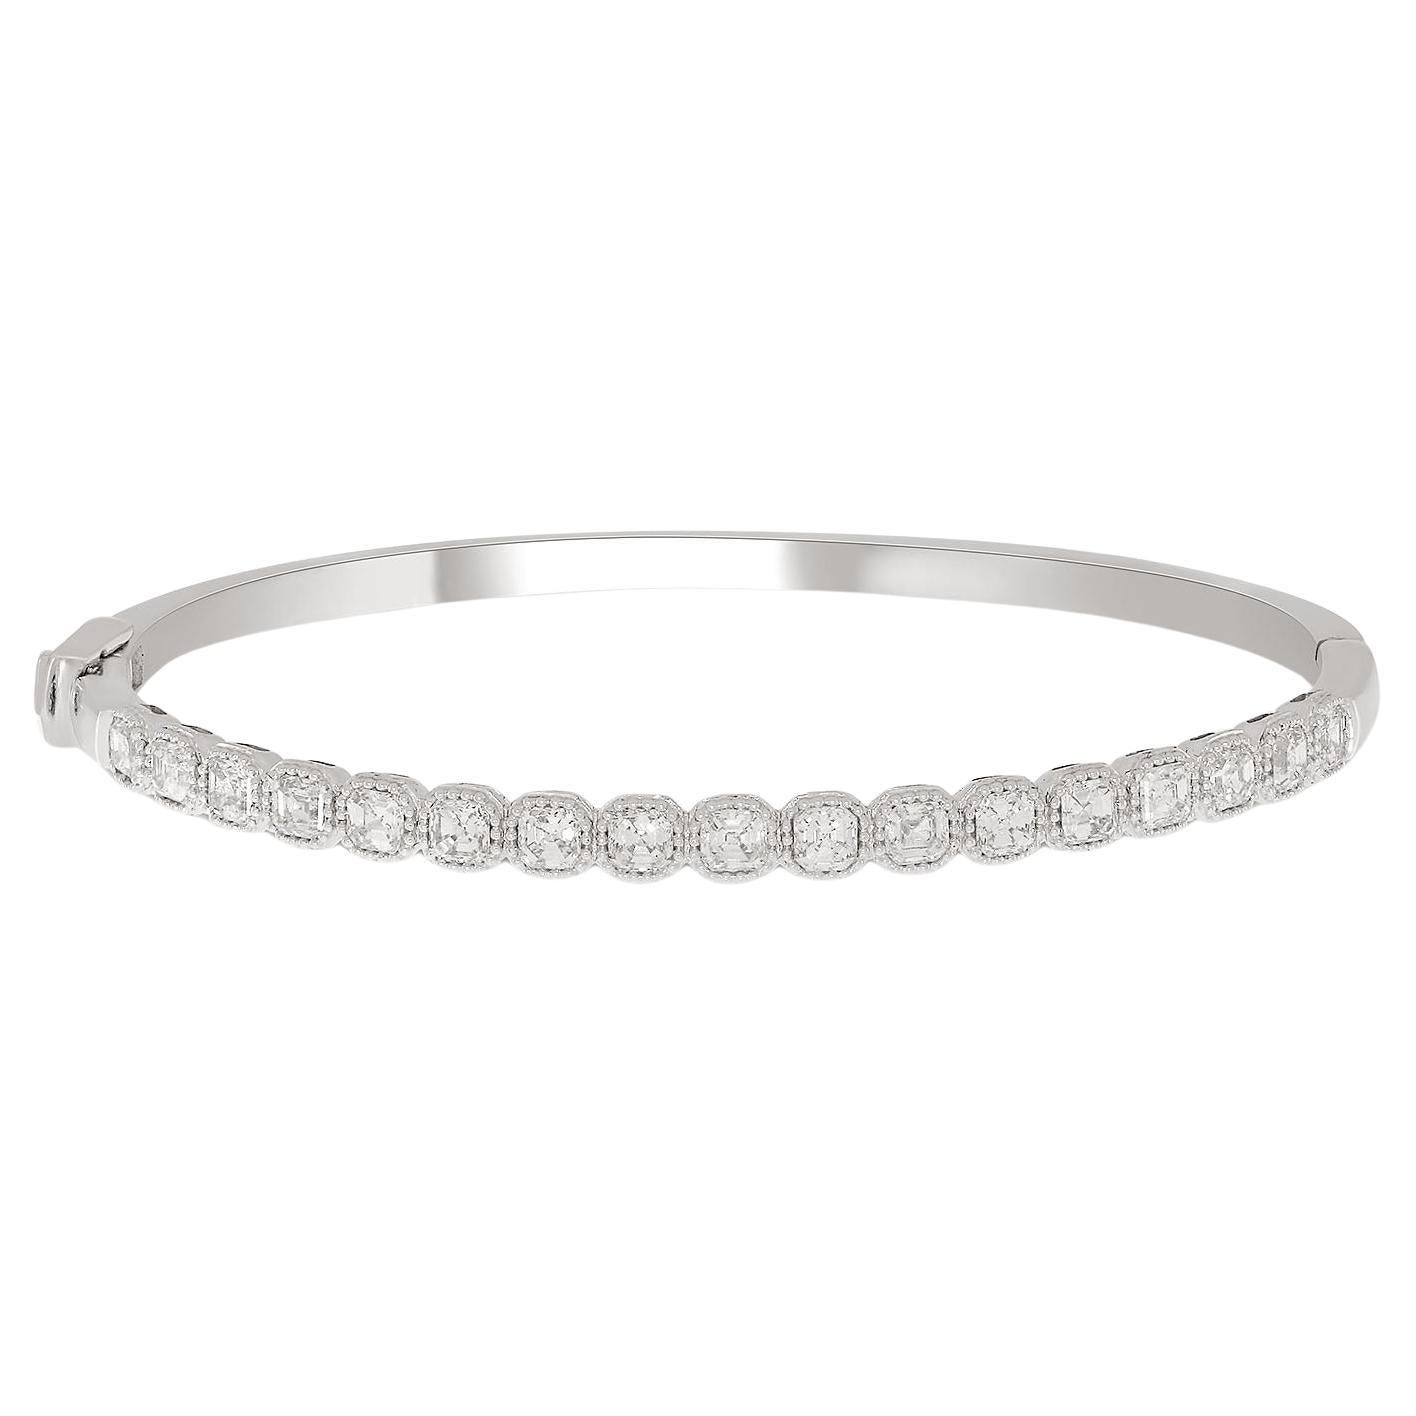 Cushion Shaped Tennis Bangle made In 14k White Gold For Sale